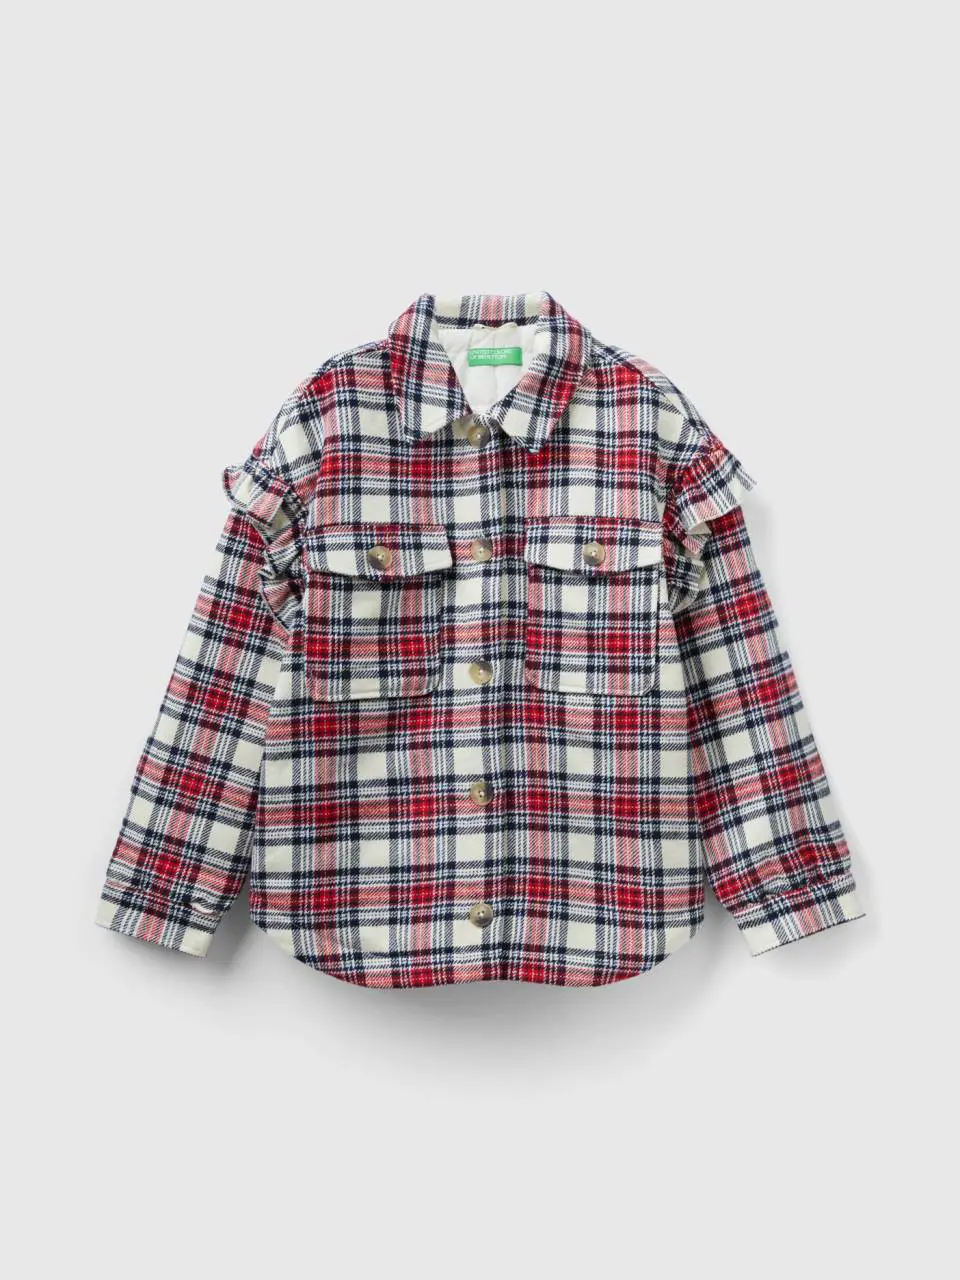 Benetton padded check jacket with ruffles. 1